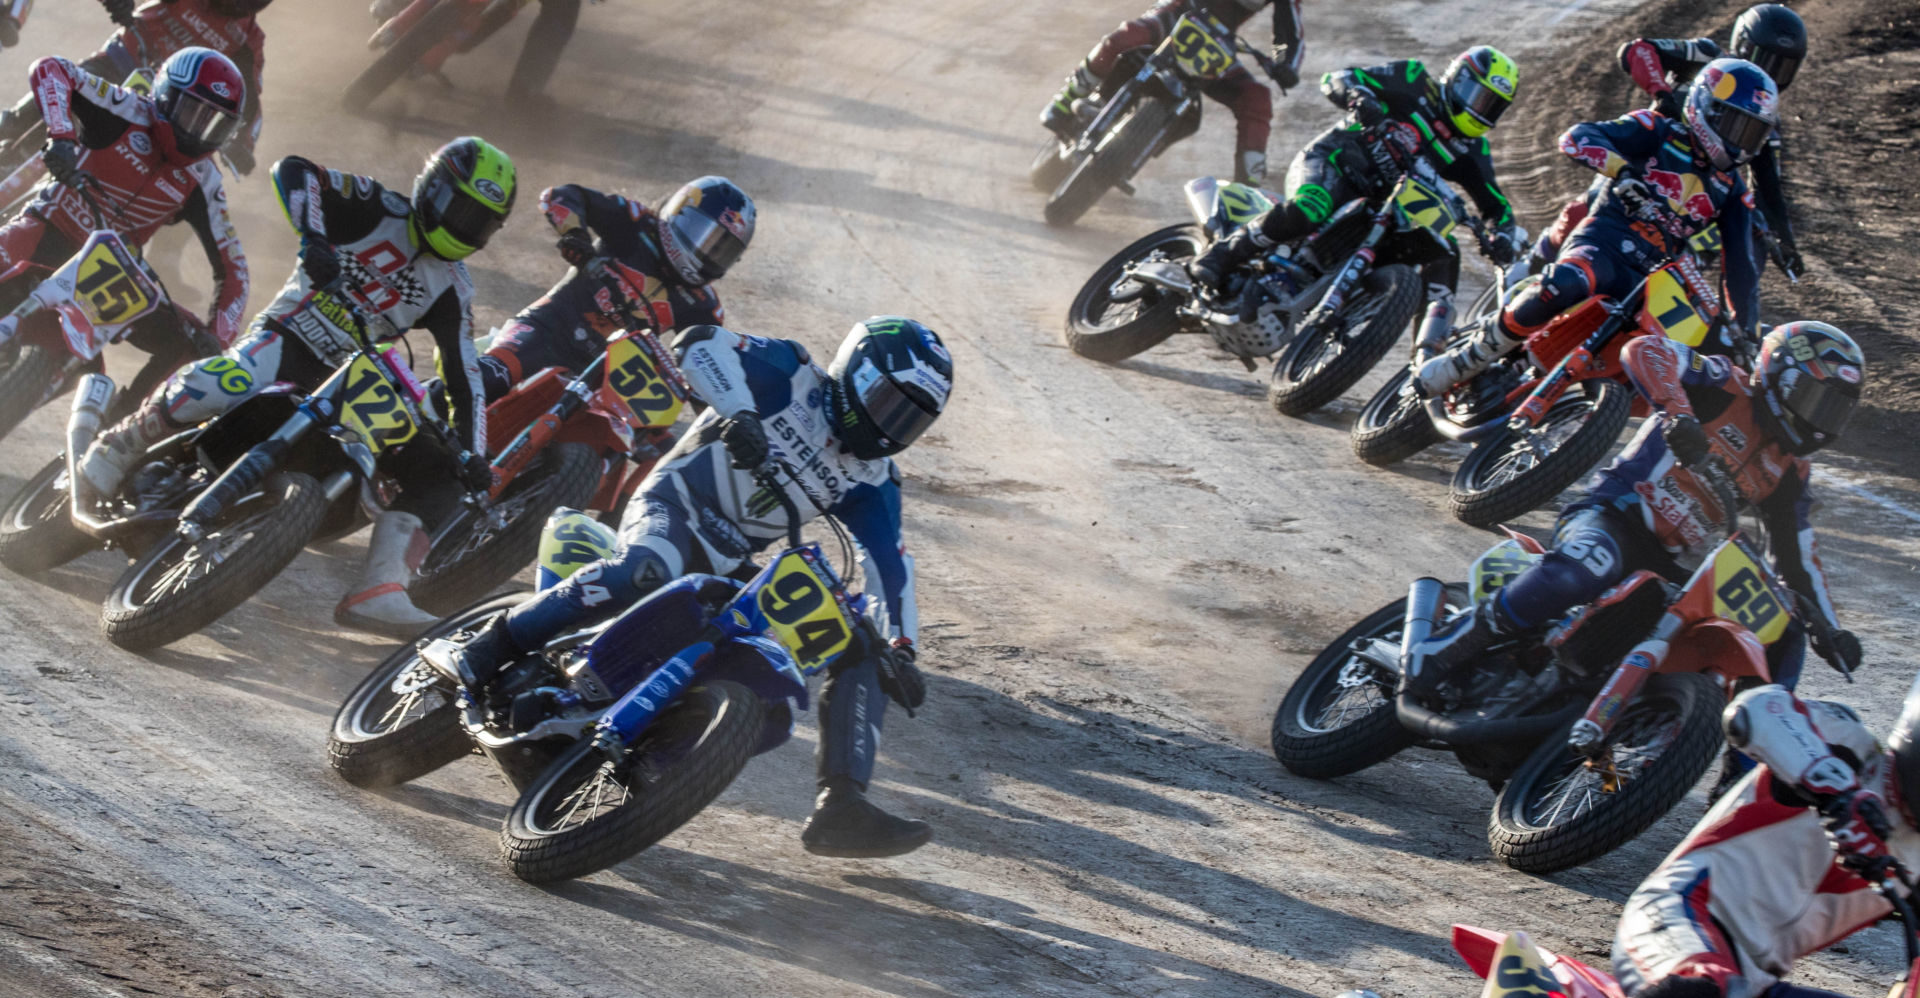 AFT Singles racers in action. Photo by Scott Hunter, courtesy of AFT.